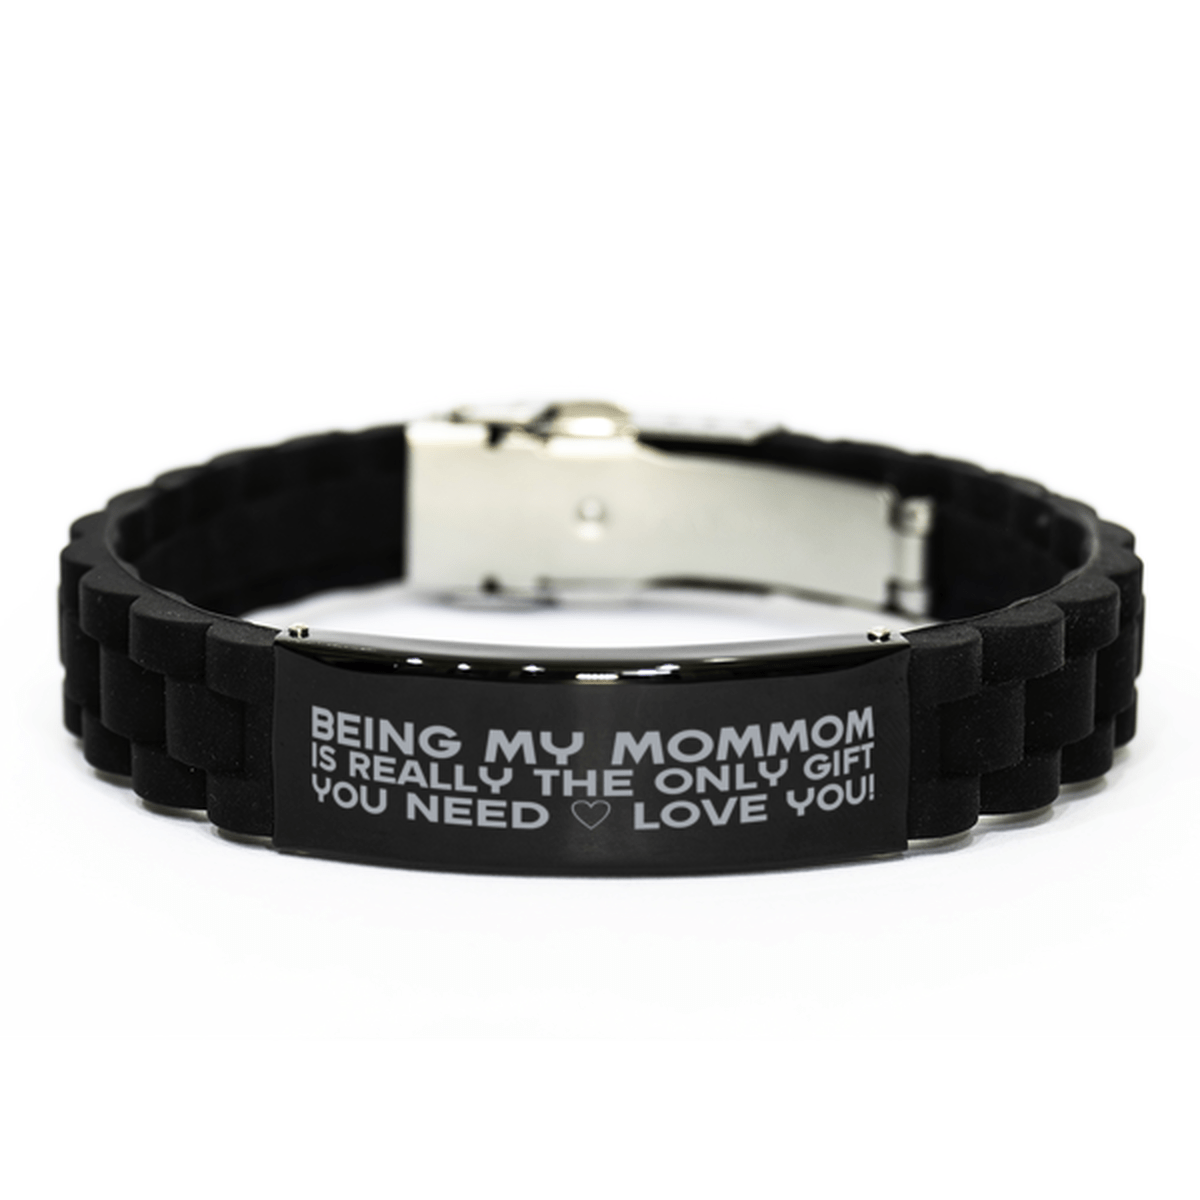 Funny Mommom Bracelet, Being My Mommom Is Really the Only Gift You Need, Best Birthday Gifts for Mommom